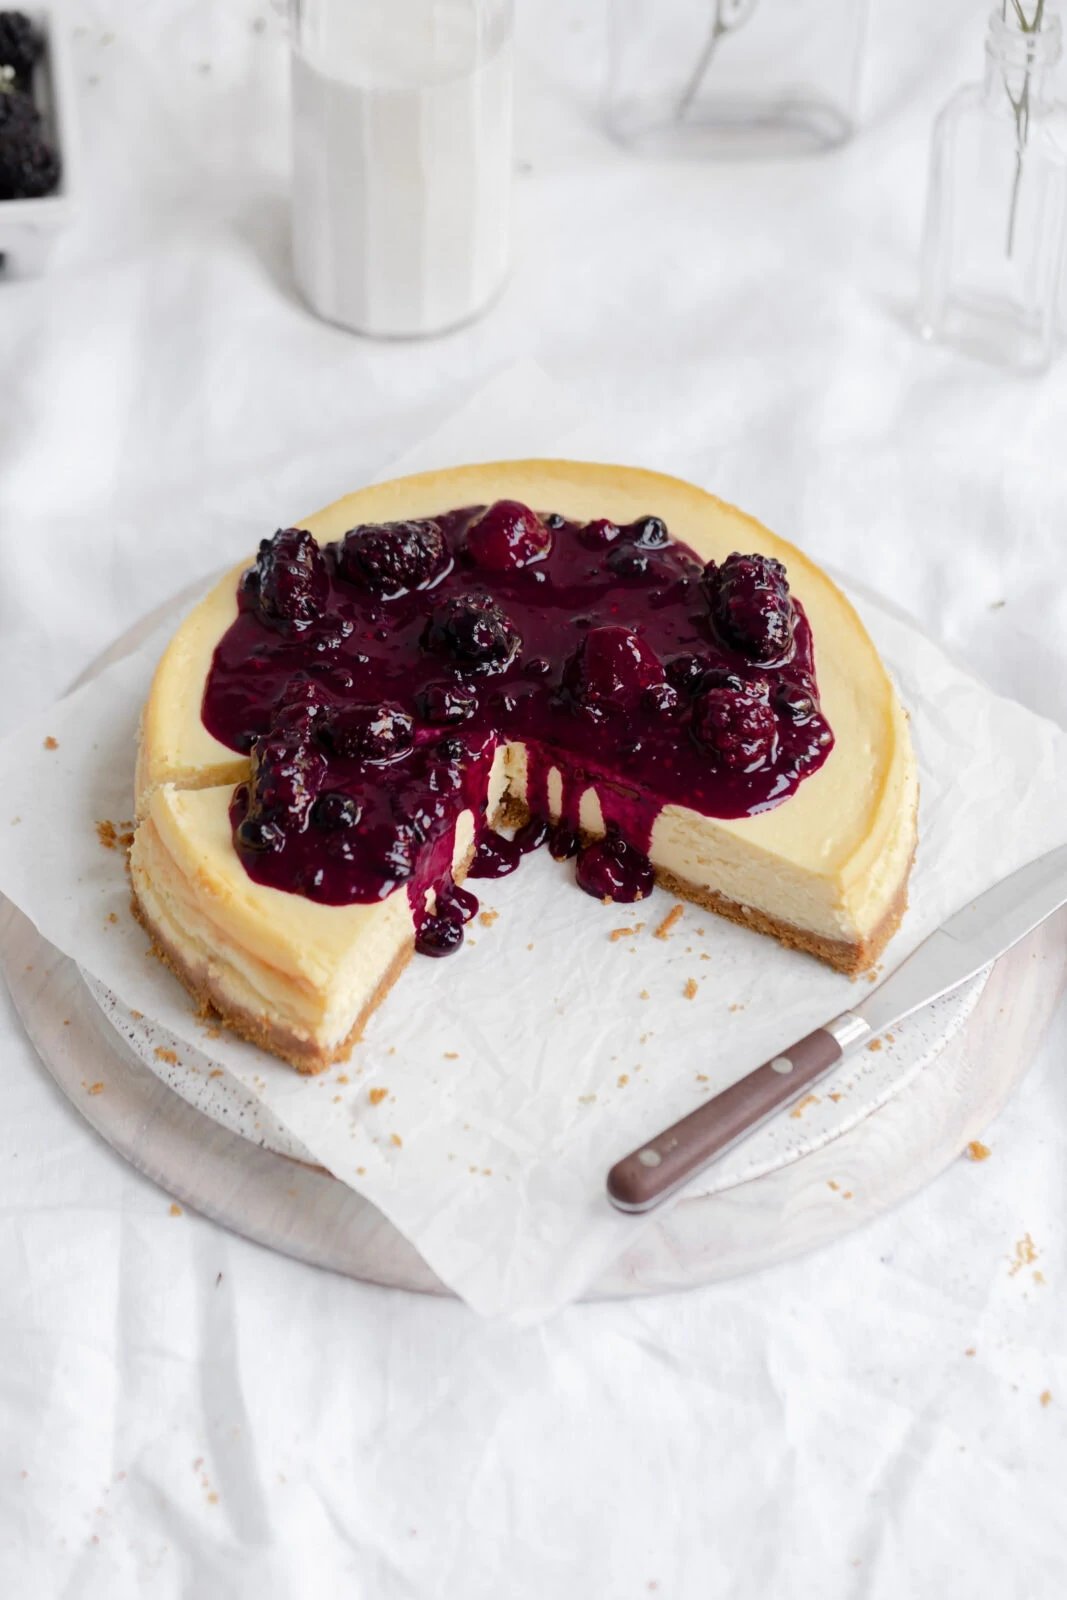 homemade cheesecake with berry compote